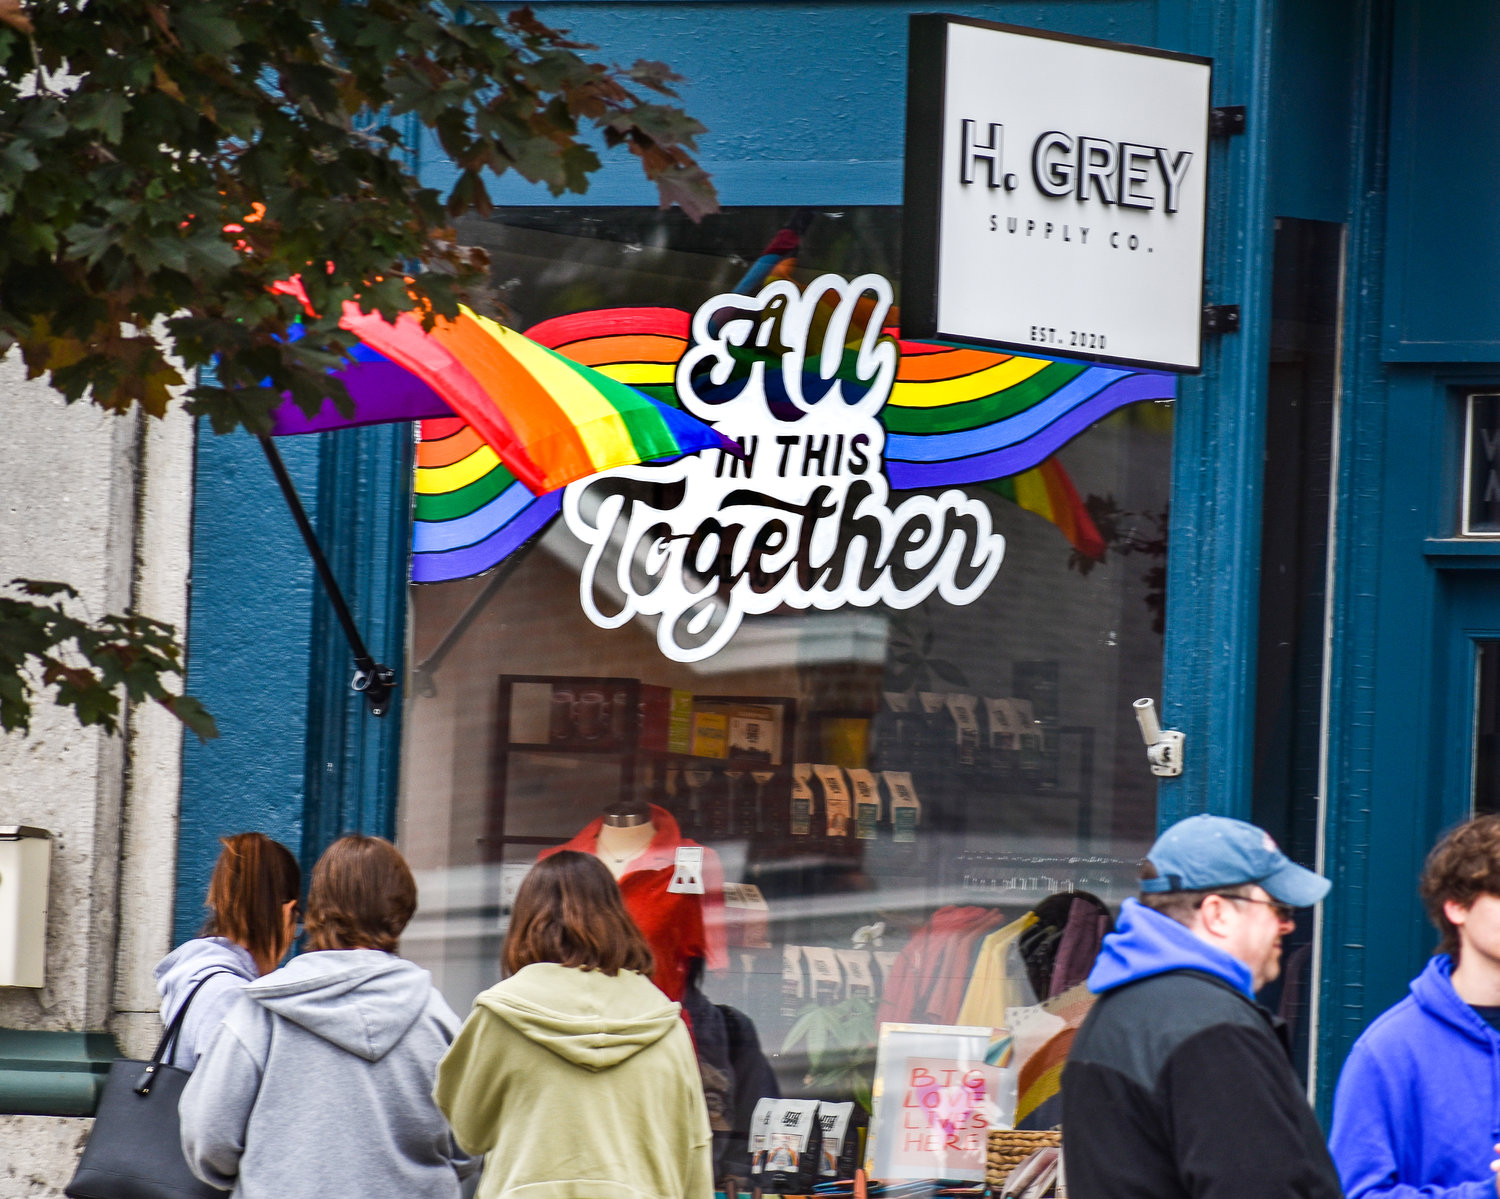 The window of H. Grey Supply Co. on Albany Street is bringing the pride spirit. Shop owner Travis Barr has led the effort to bring more LGBTQ+ representation to the community.